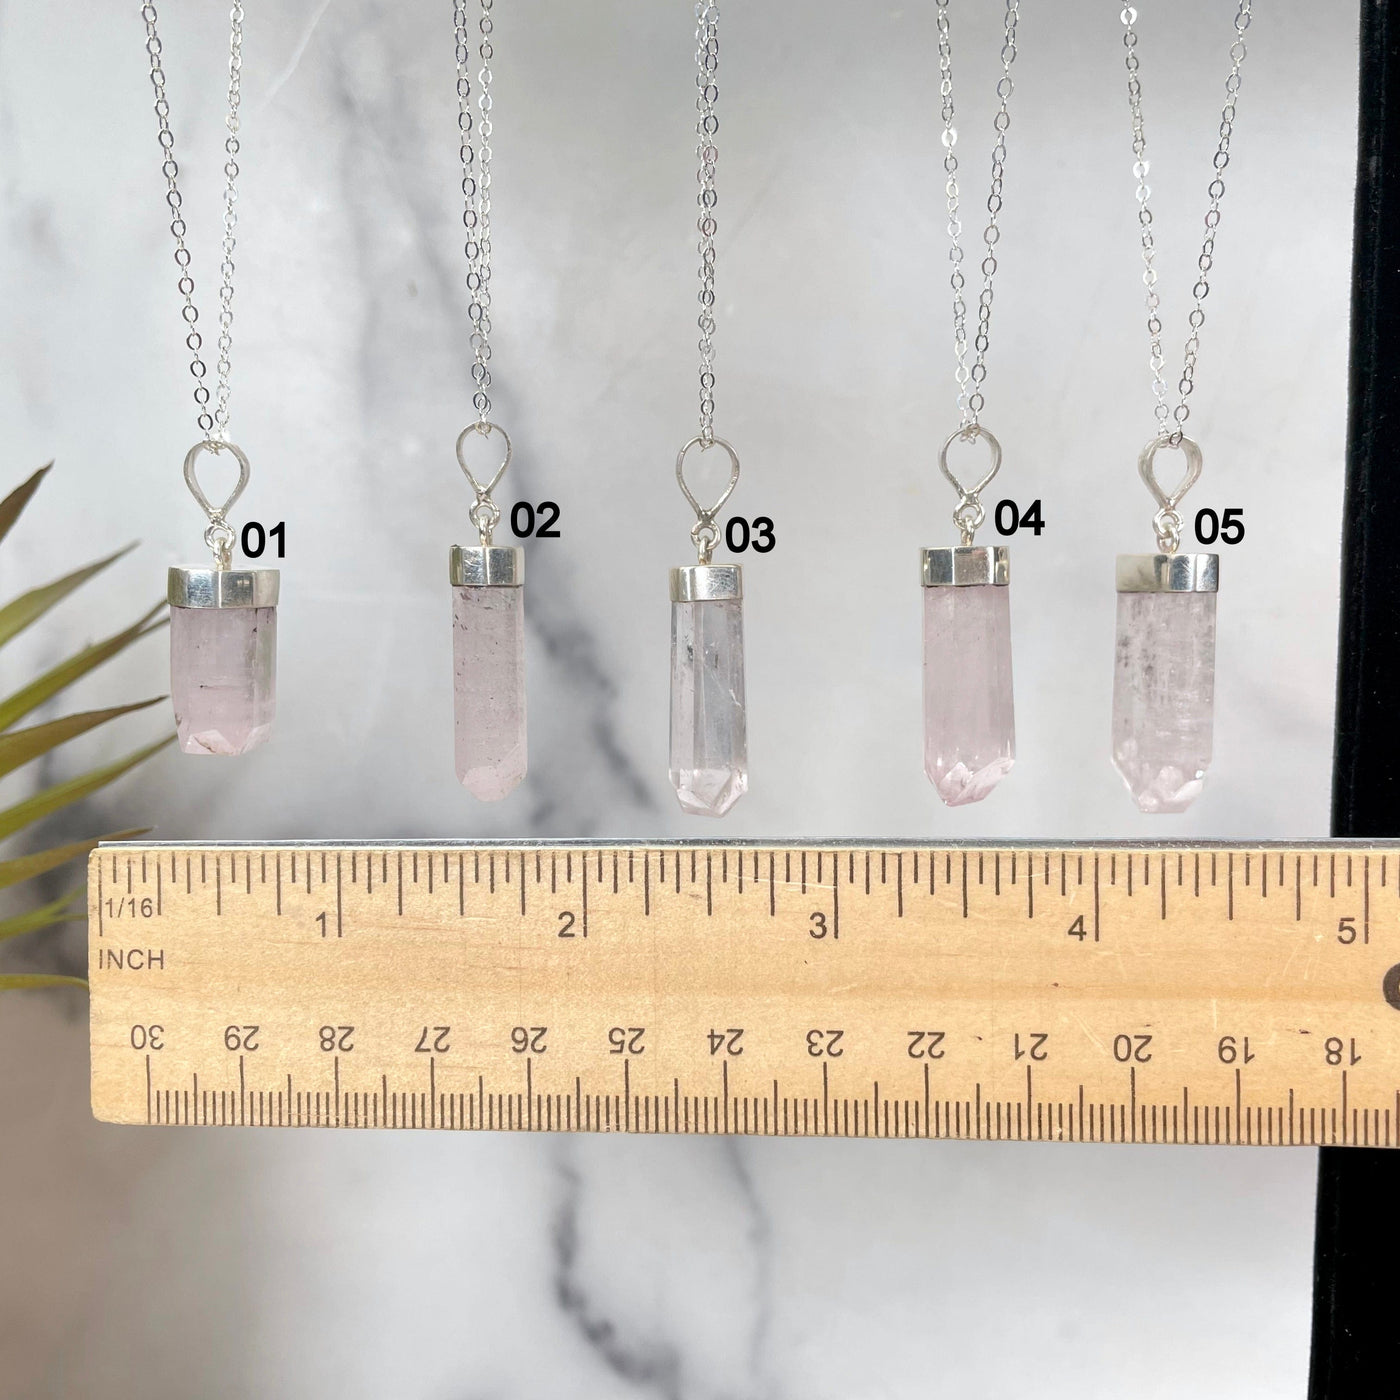 pink kunzite necklace option 01 - 05 with ruler for size reference